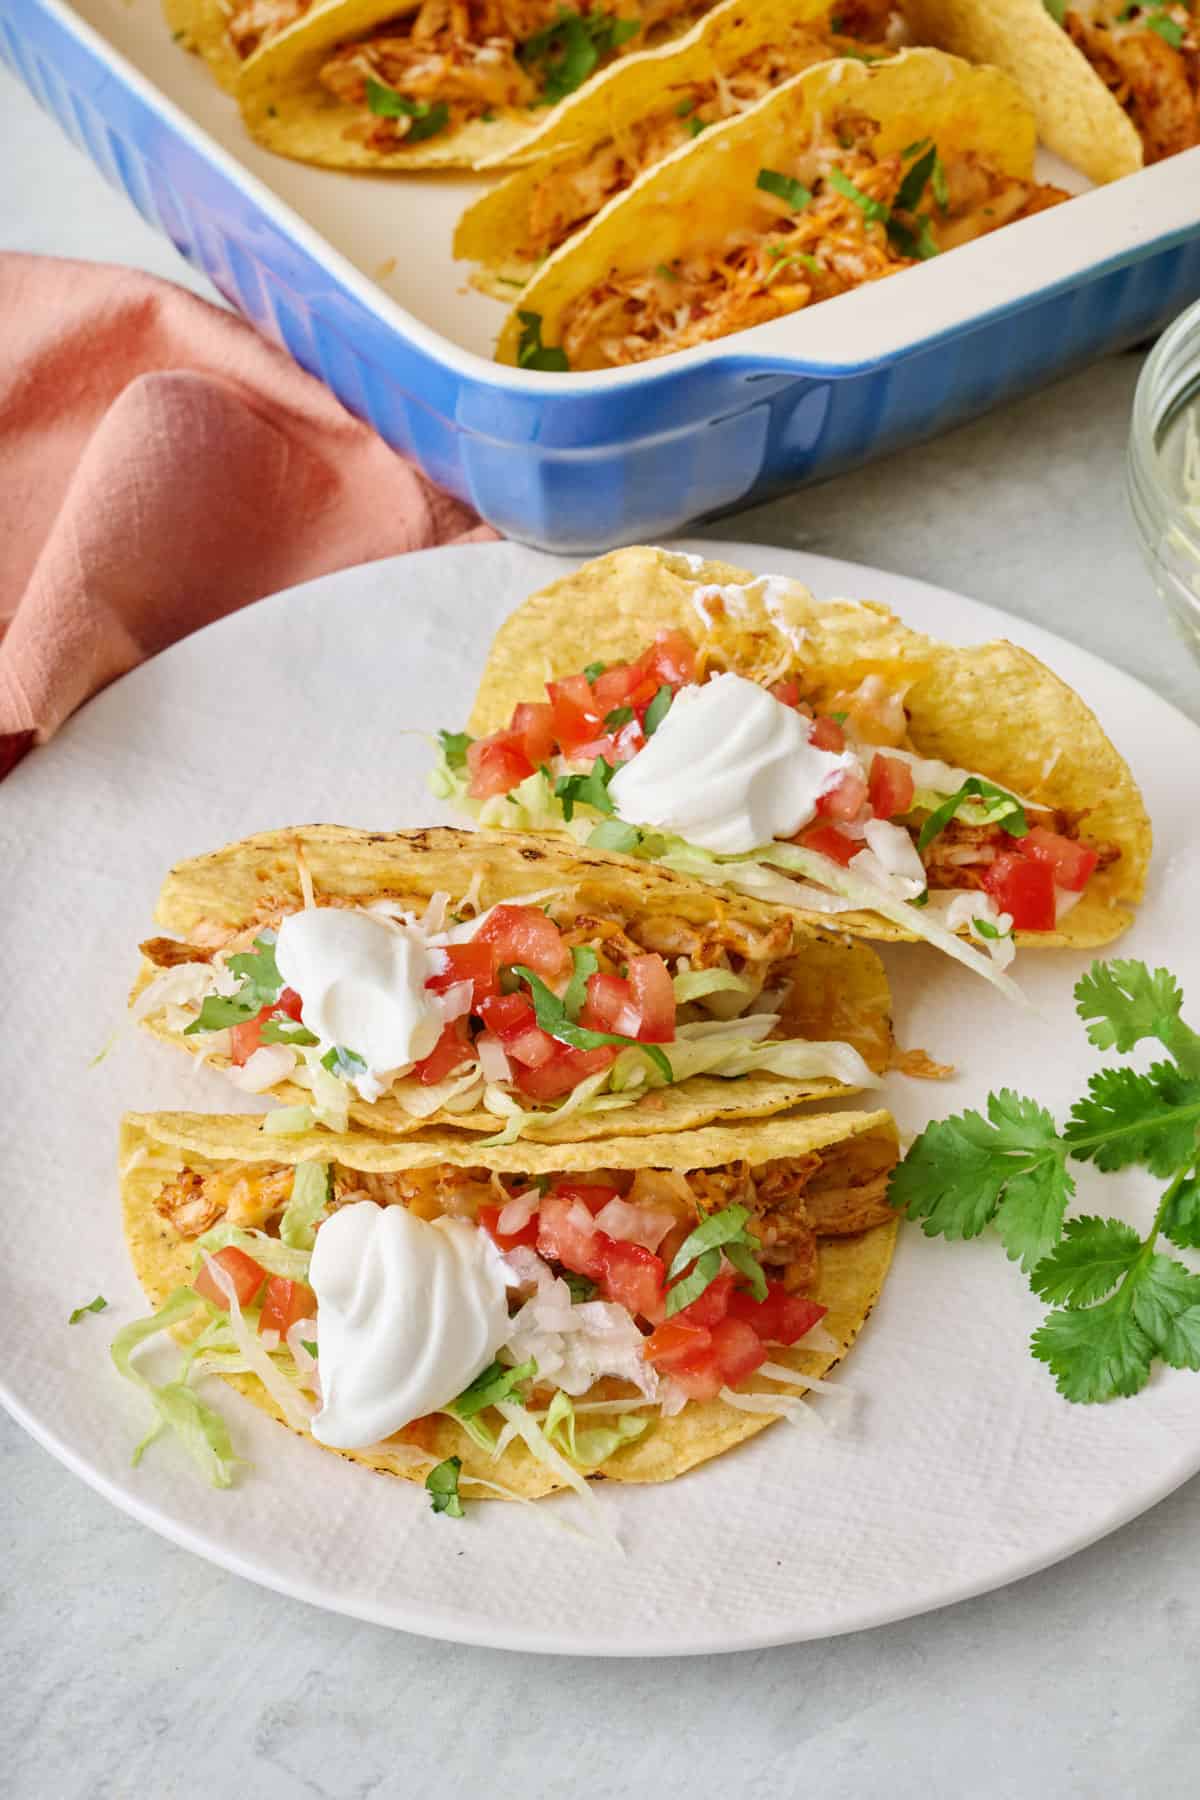 3 prepared baked chicken tacos on a small plate garnished with sour cream, tomatoes, and fresh cilantro with baking dish nearby.